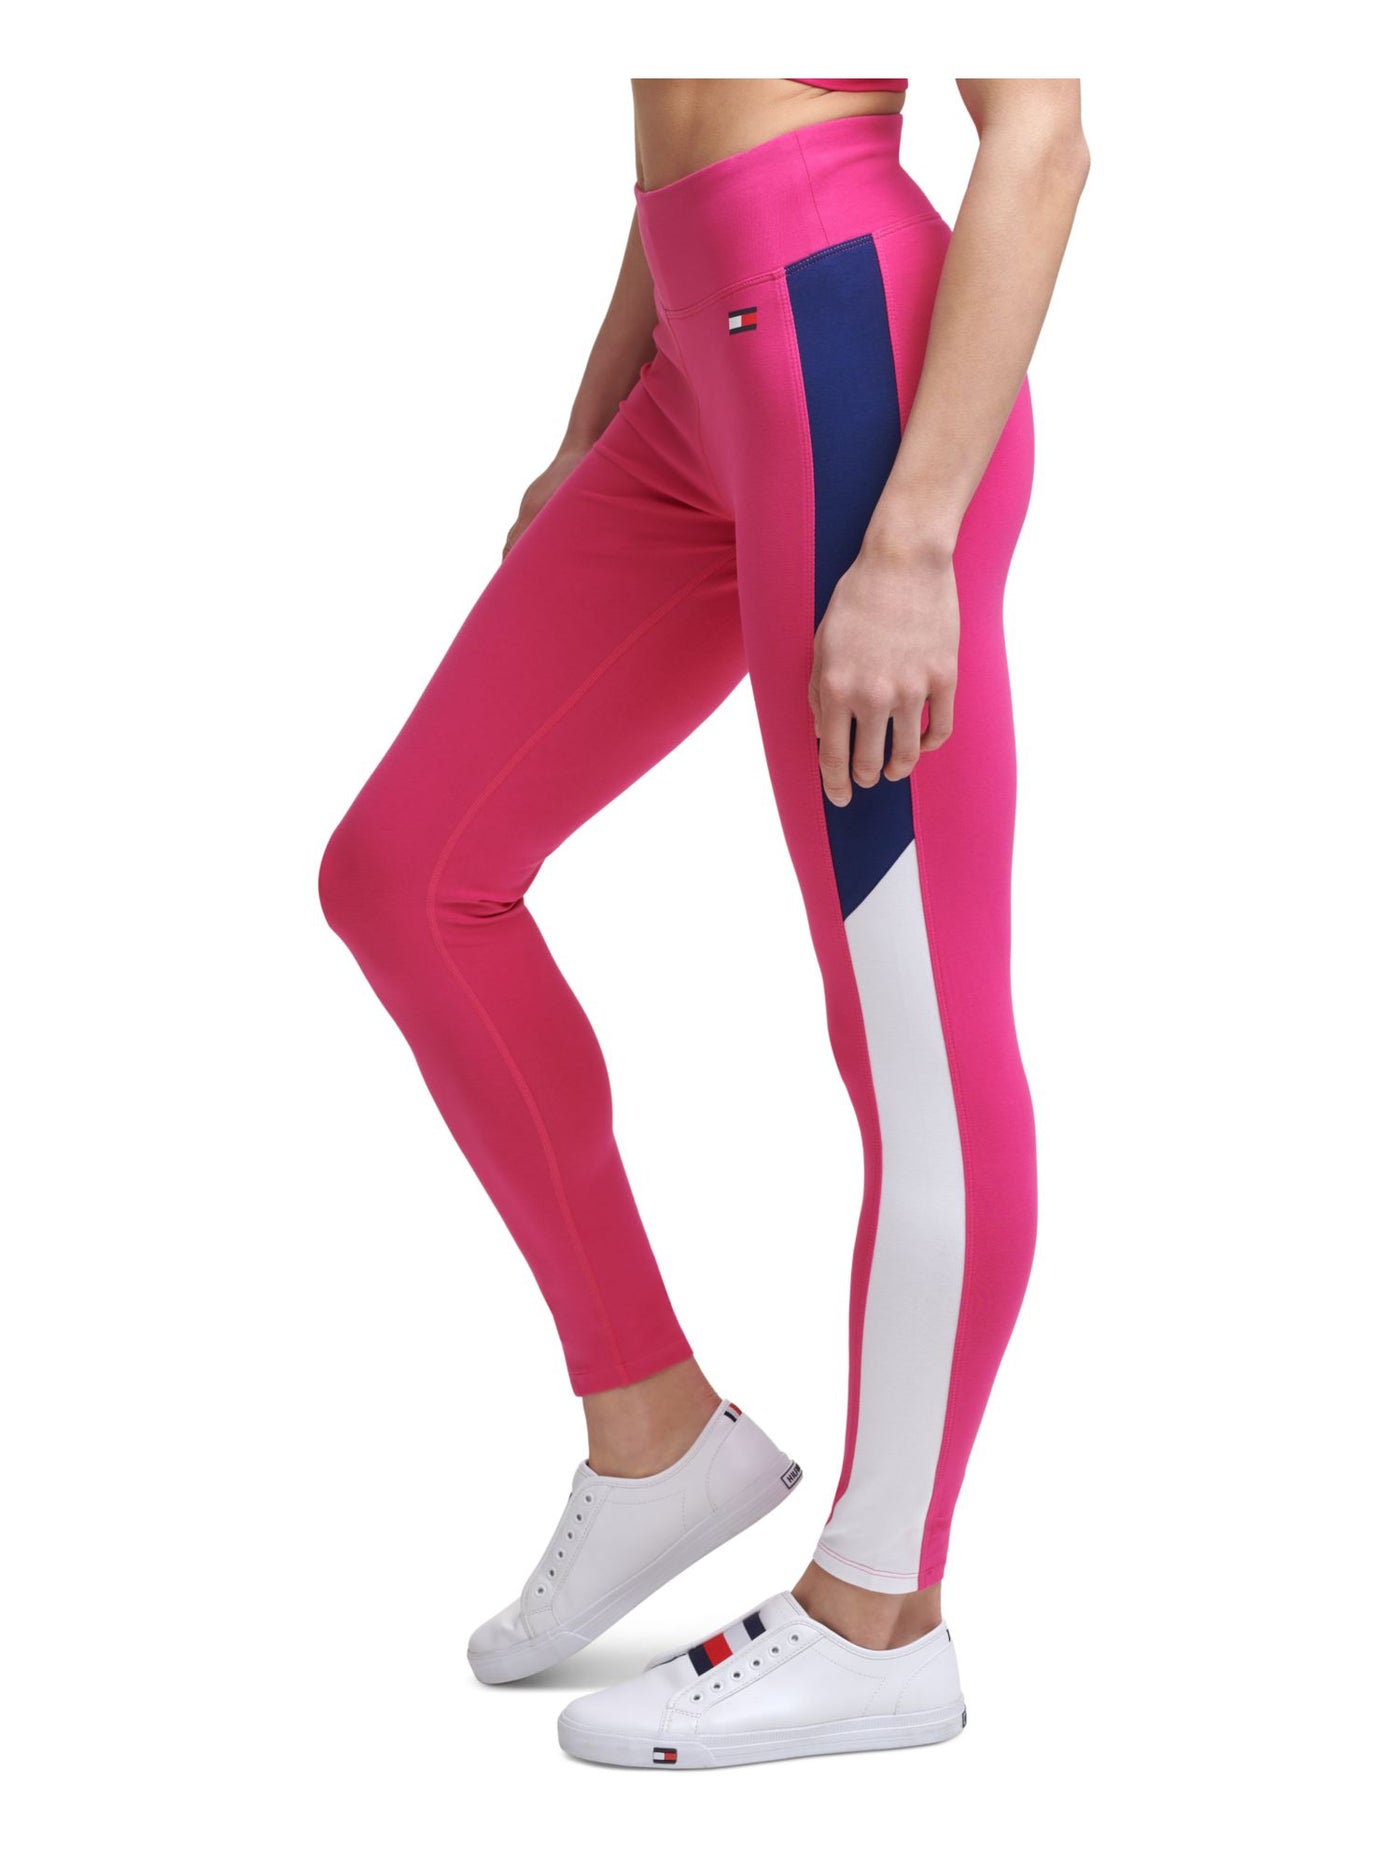 TOMMY HILFIGER SPORT Womens Pink Stretch Color Block Active Wear High Waist Leggings S